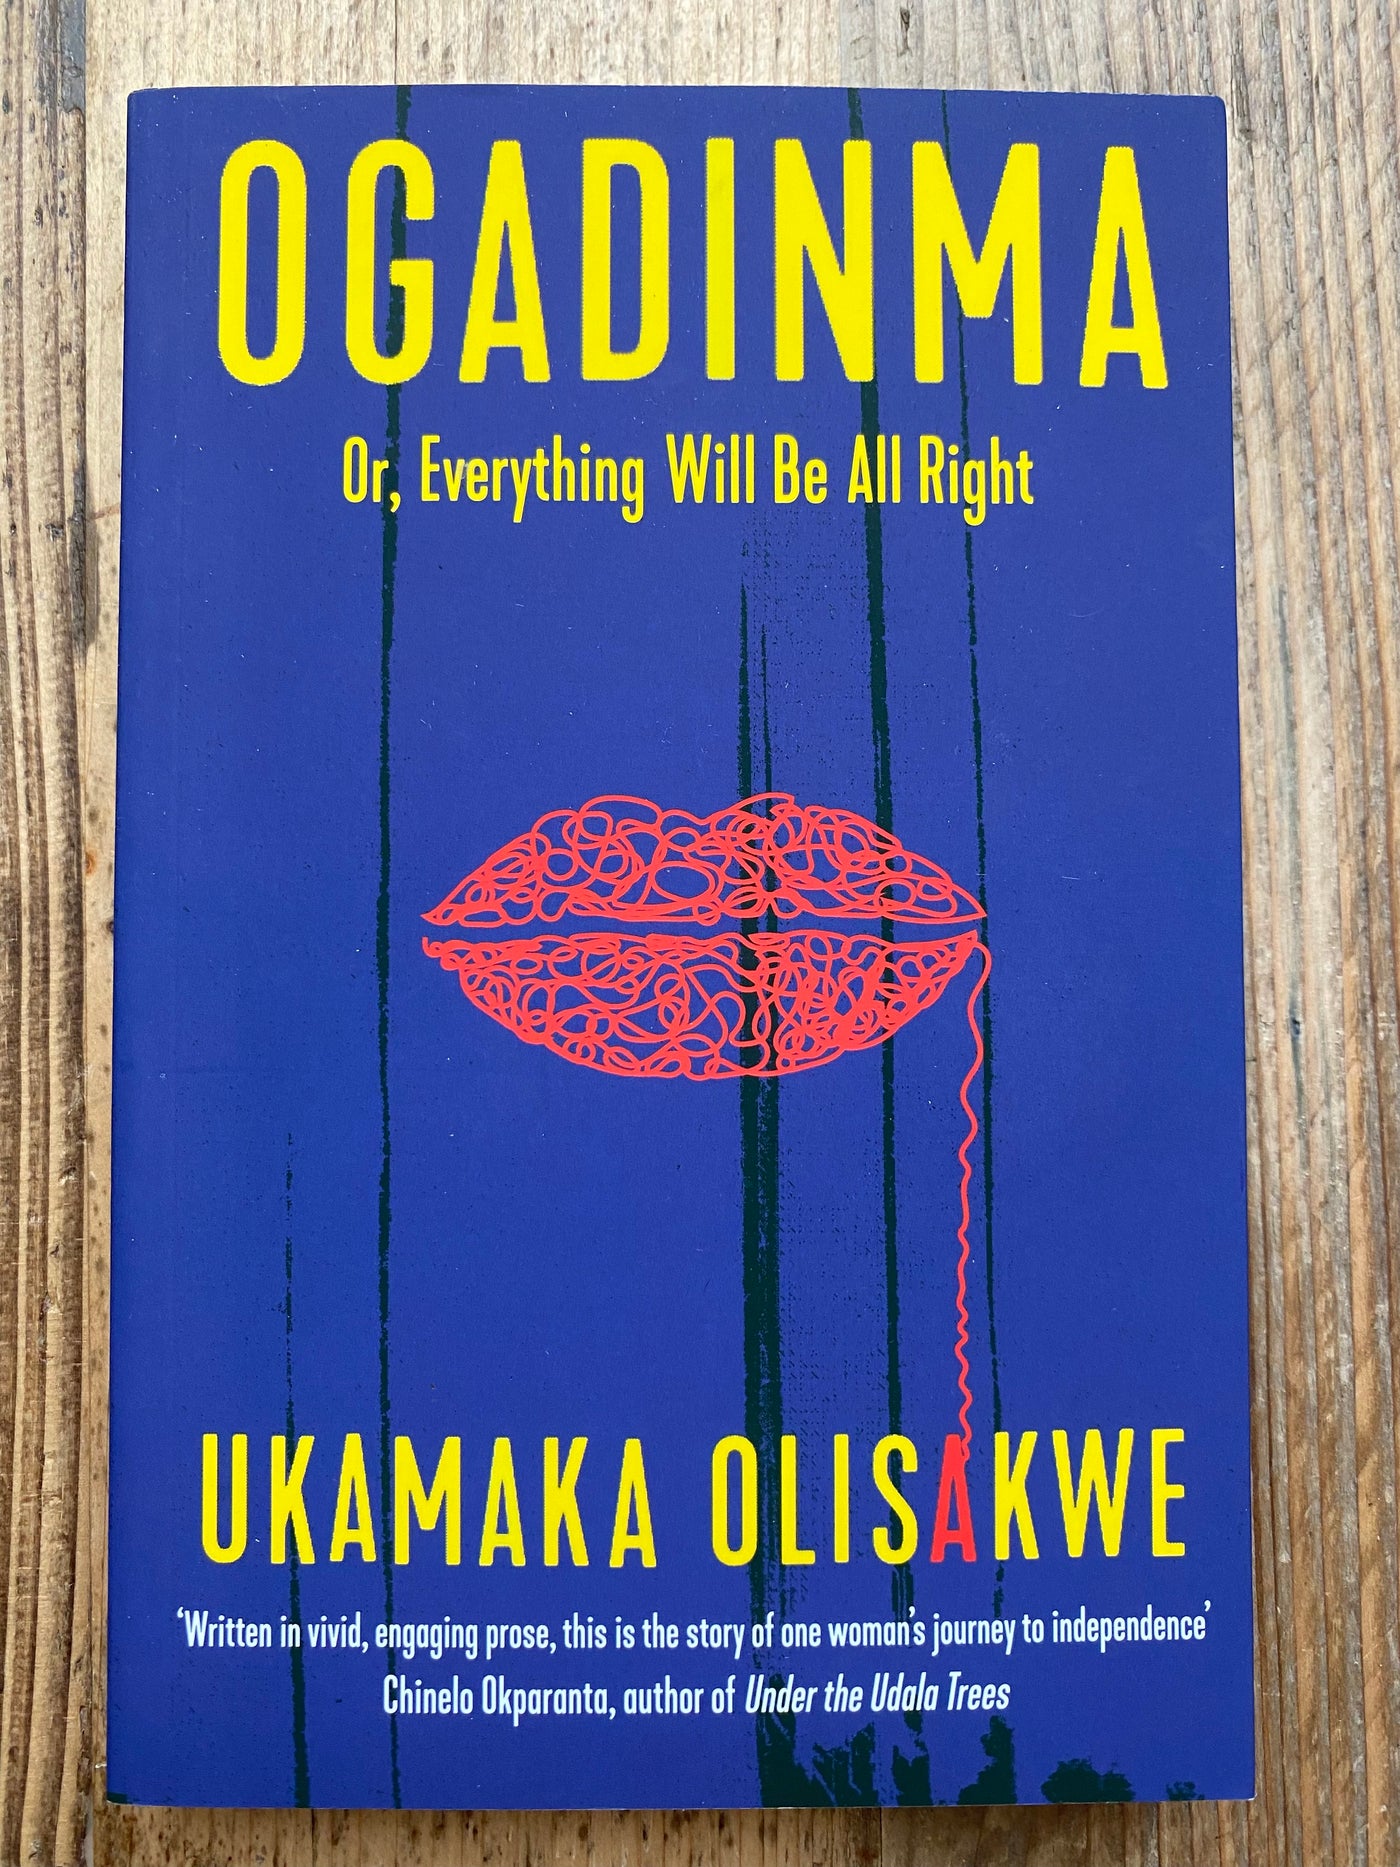 Ogadinma Or, Everything Will Be All Right